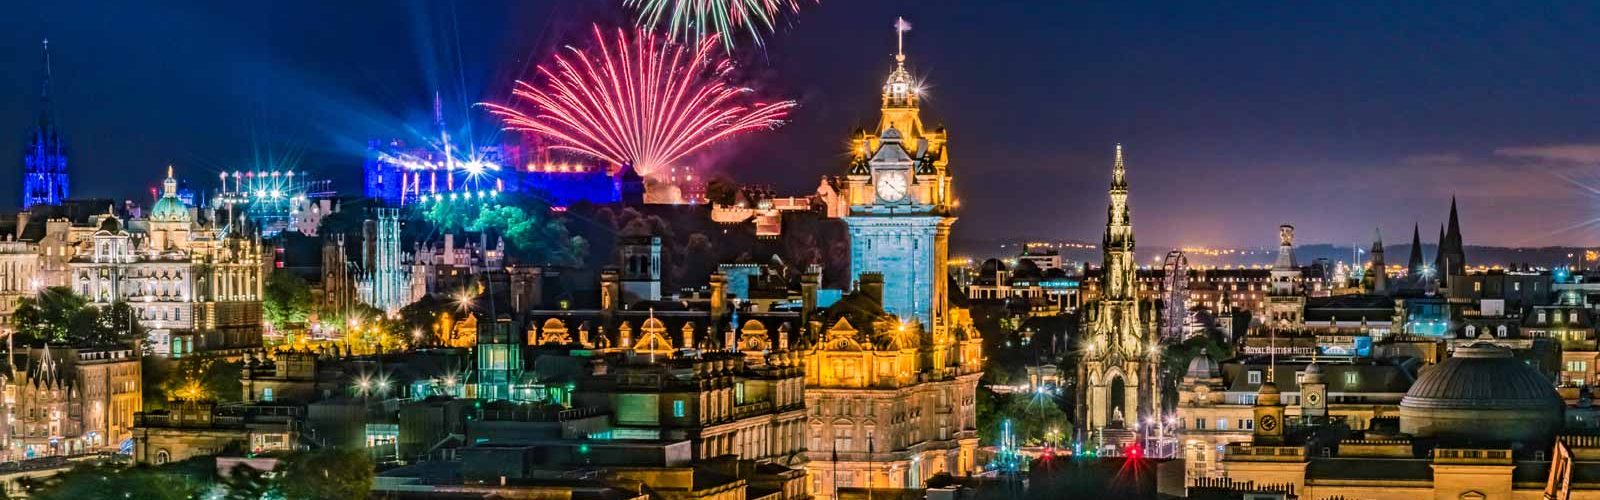 City of Edinburgh at night with Festival Fireworks in the sky